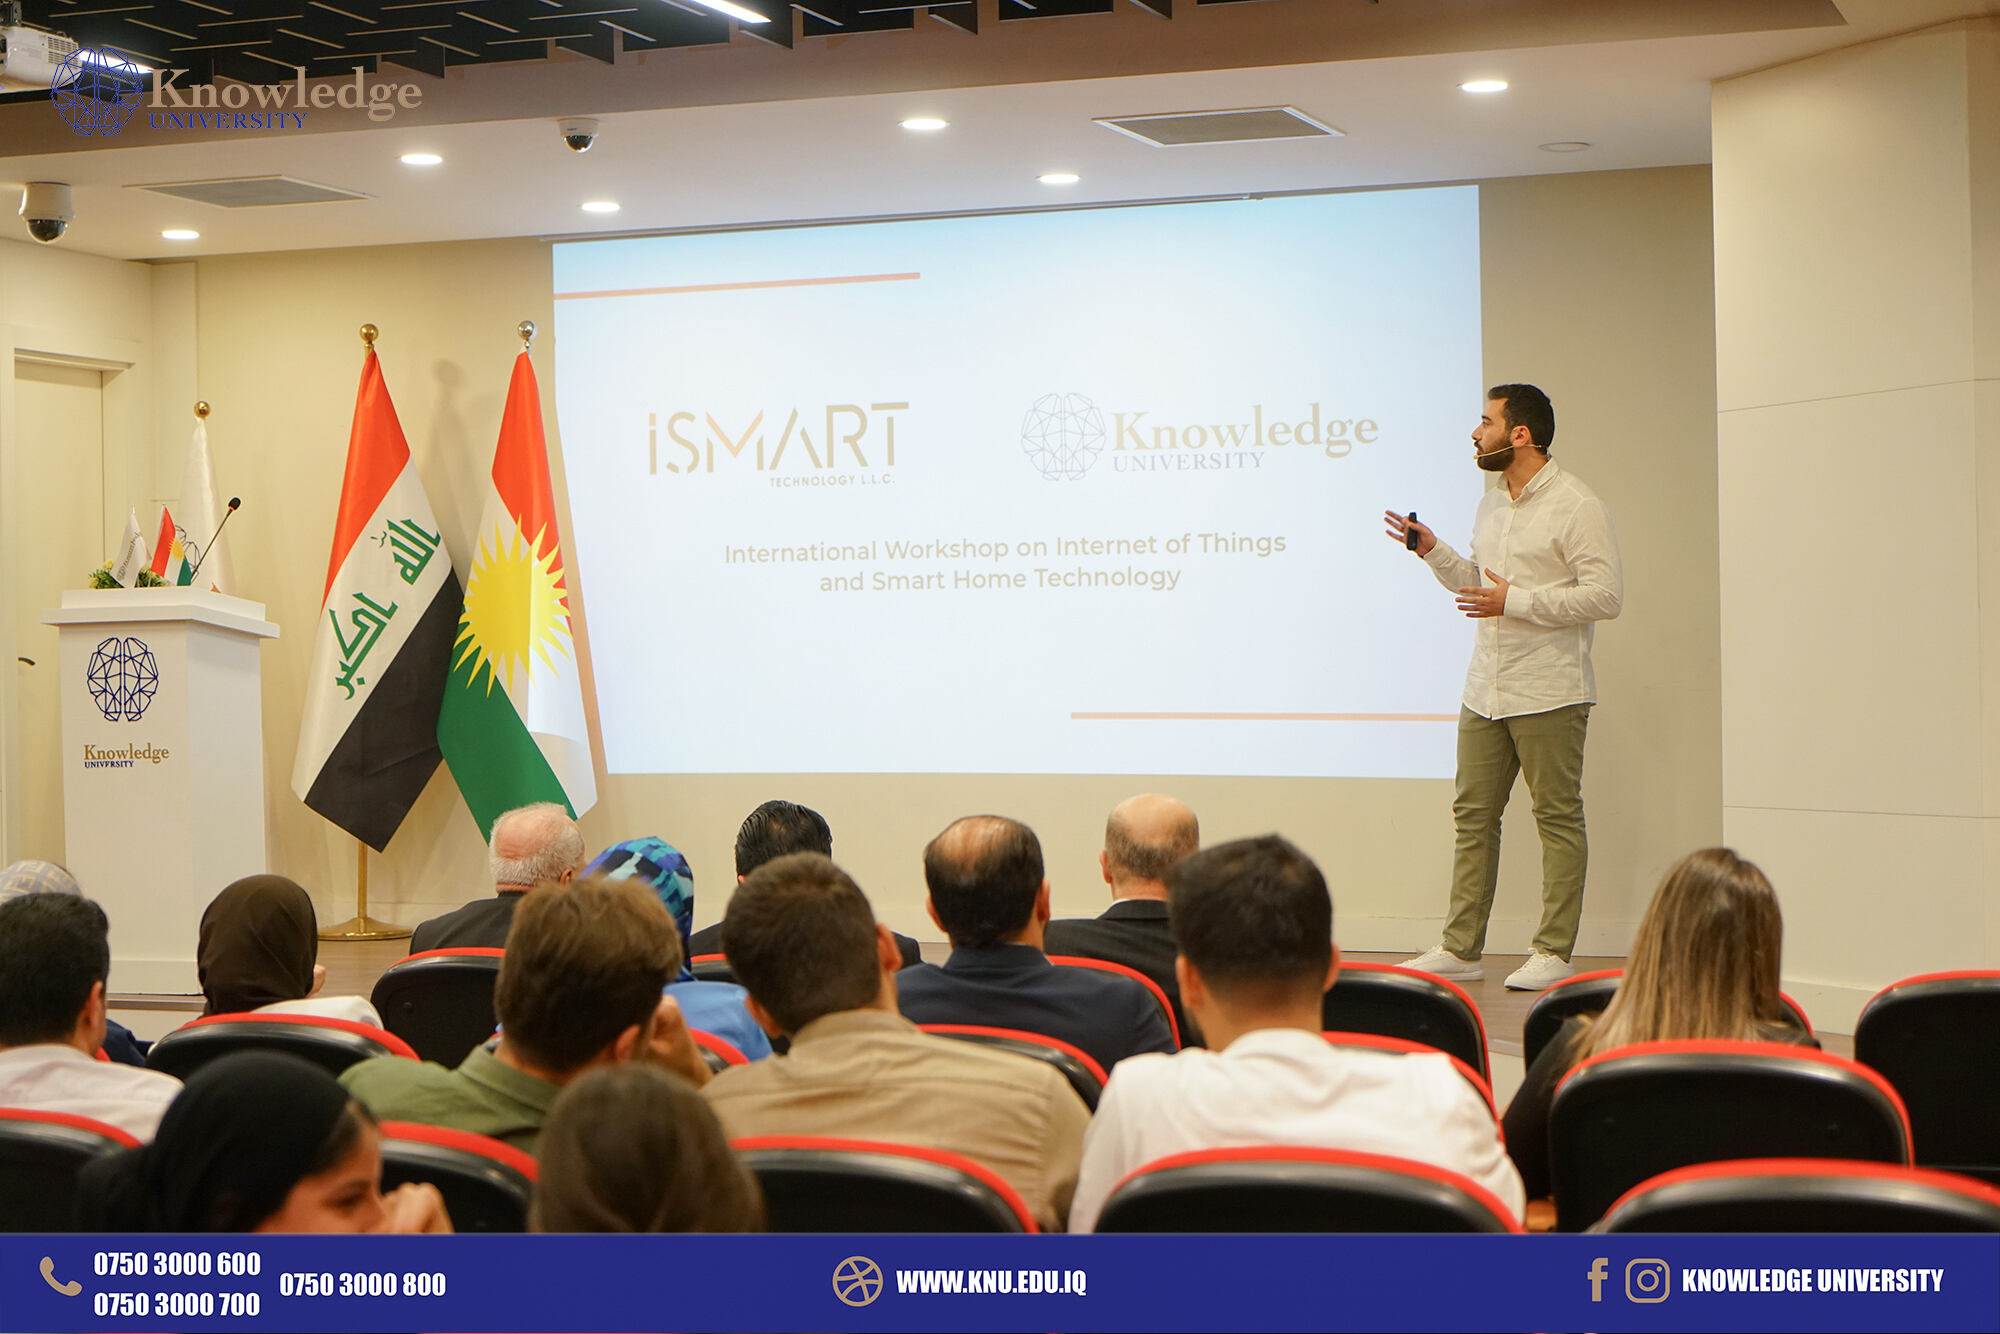 International Workshop on Internet of Things and Smart Home Technology>